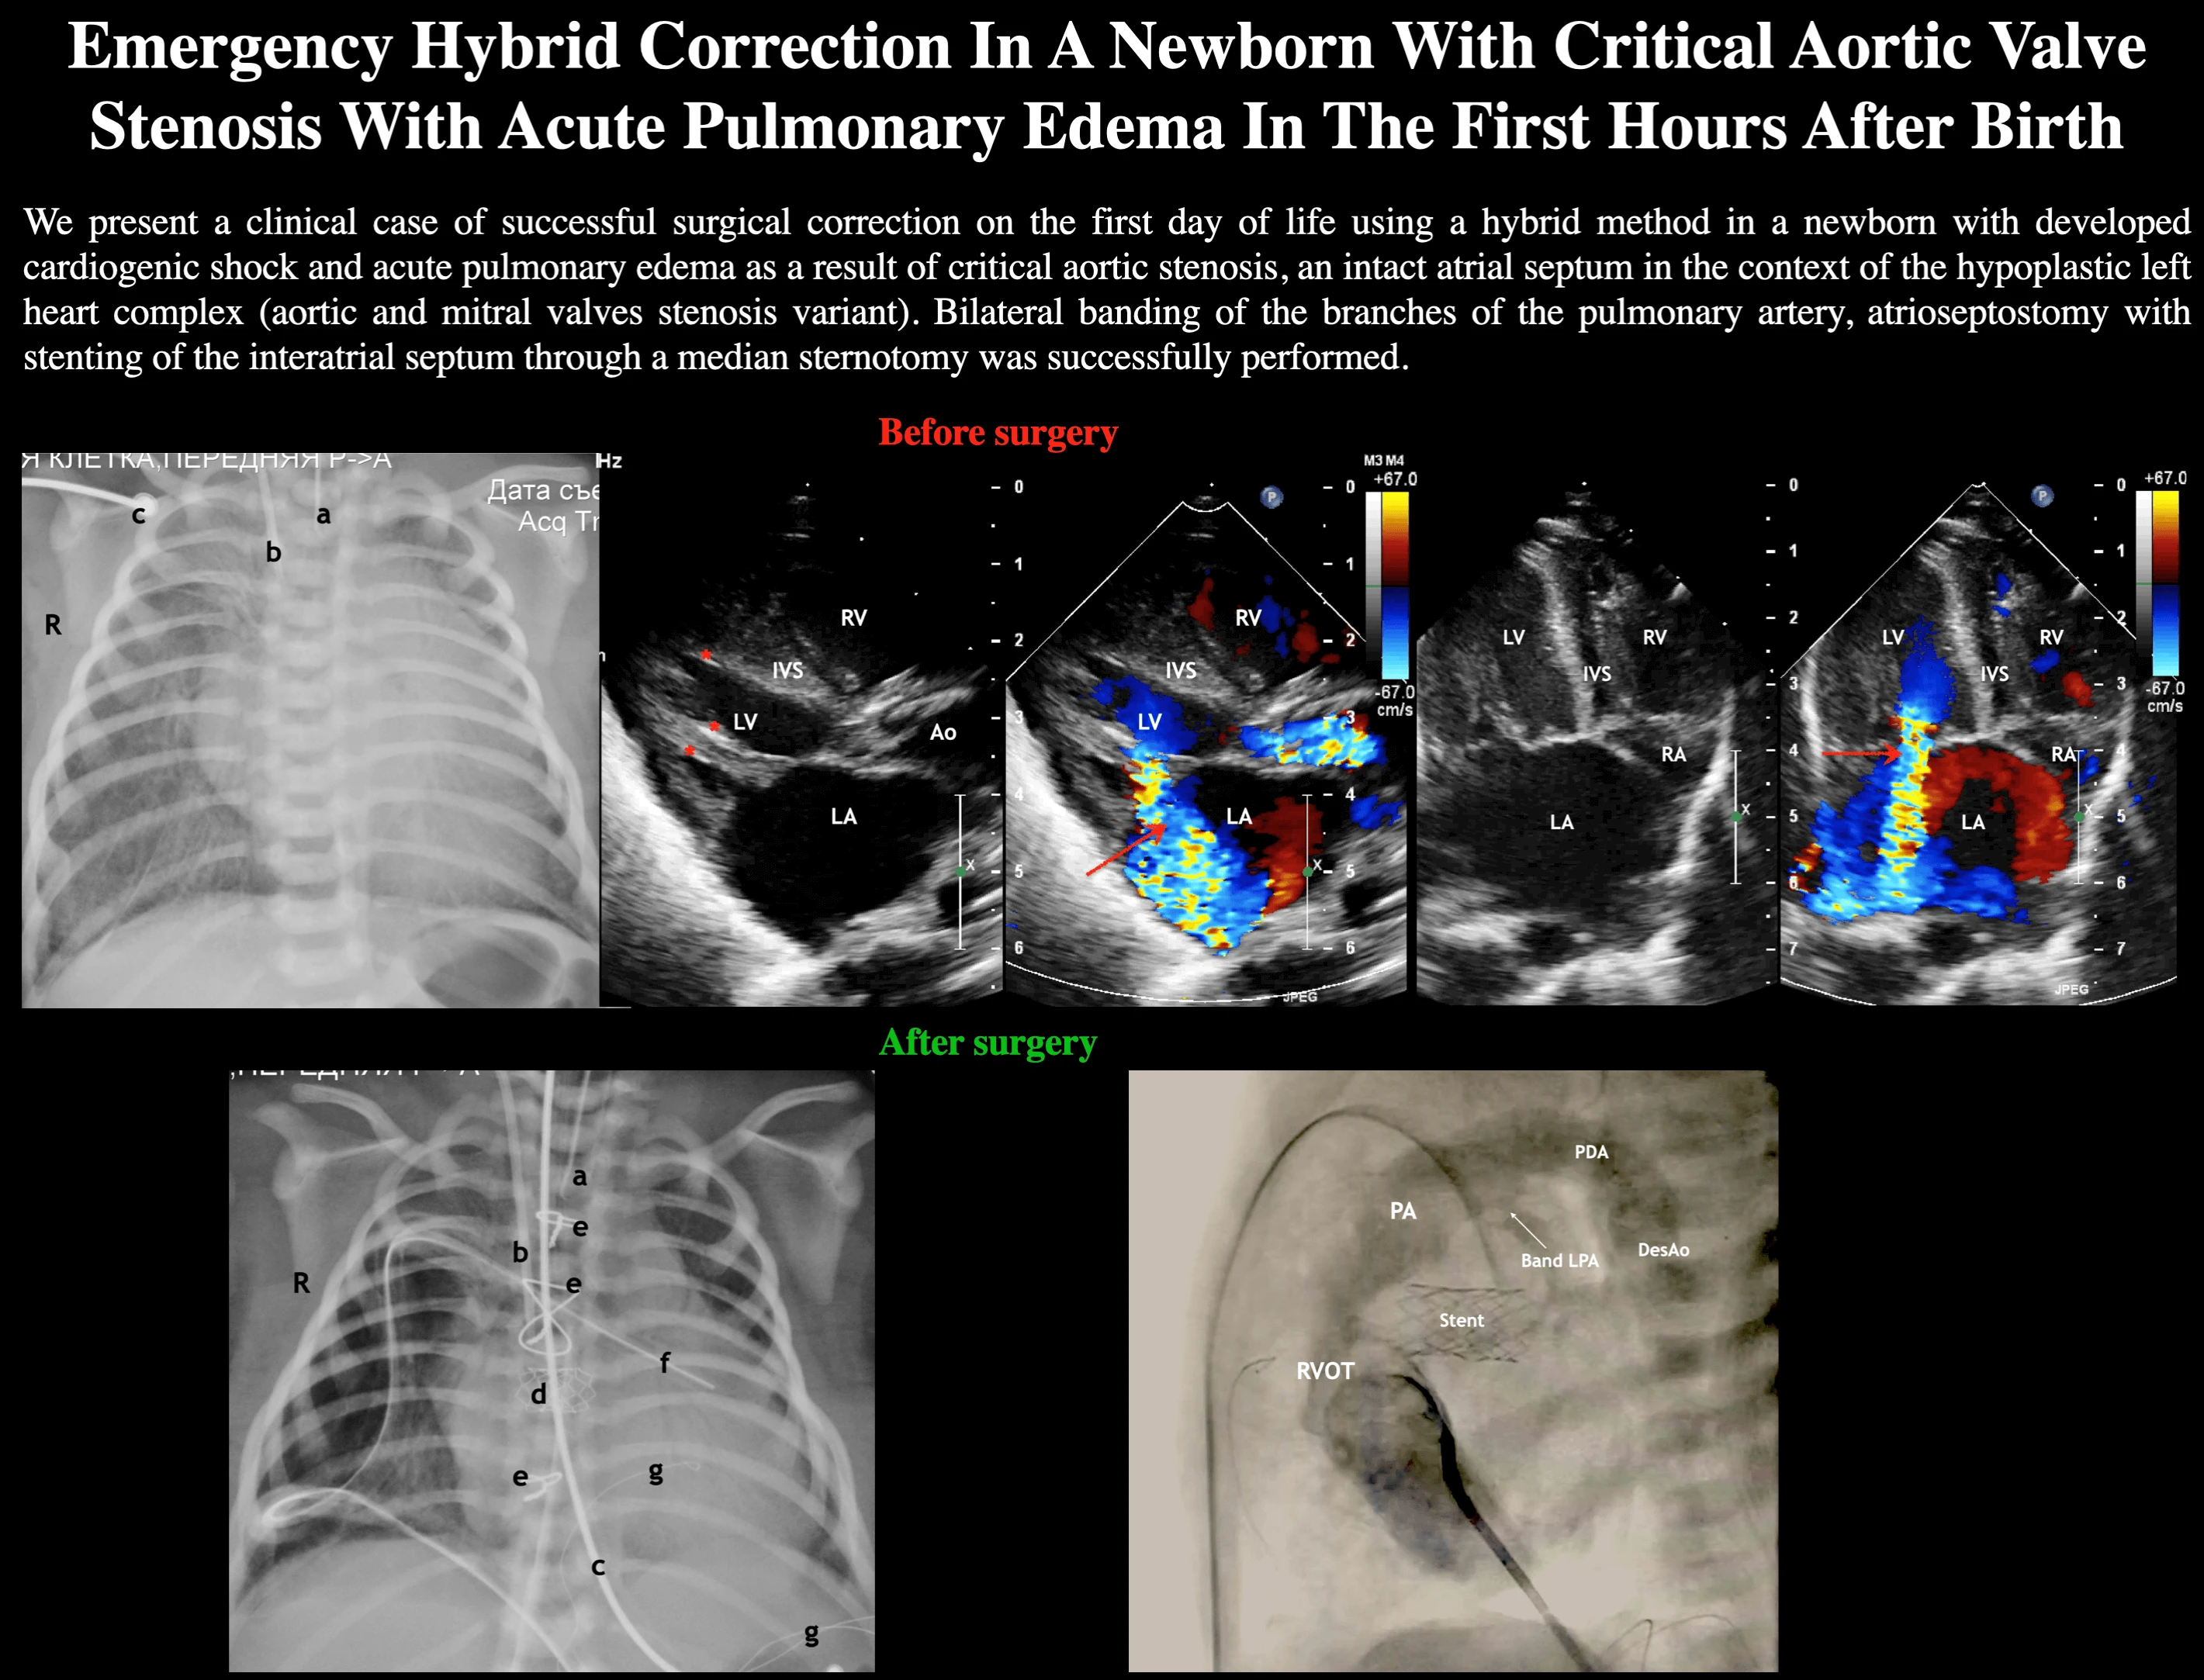 Emergency Hybrid Correction in a Newborn with Critical Aortic Valve Stenosis with Acute Pulmonary Edema in the First Hour after Birth